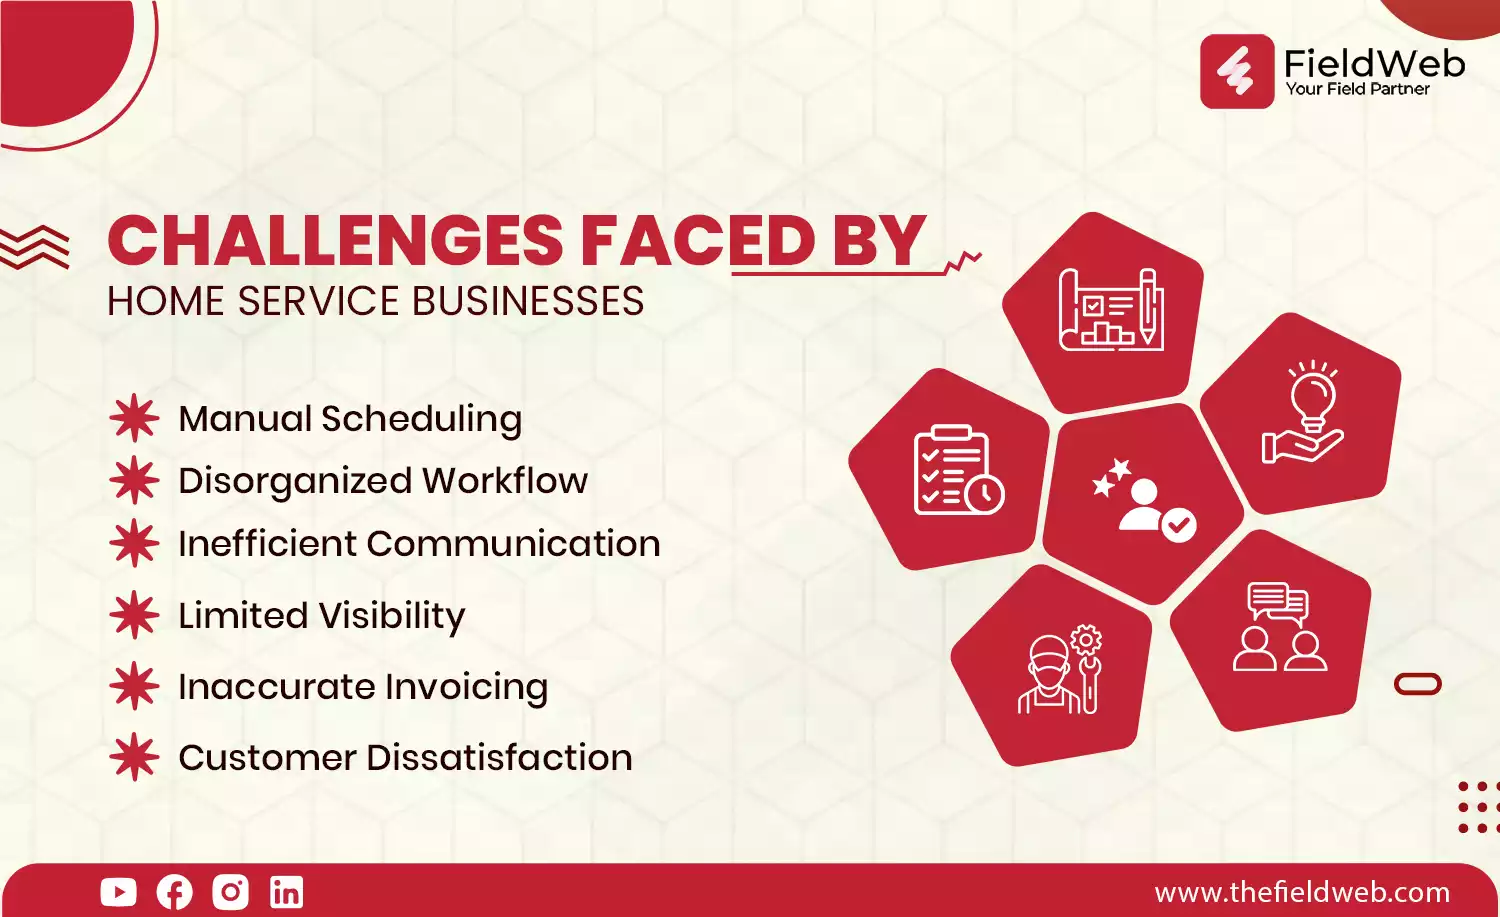 image is displaying 6 challenges faced by home service business